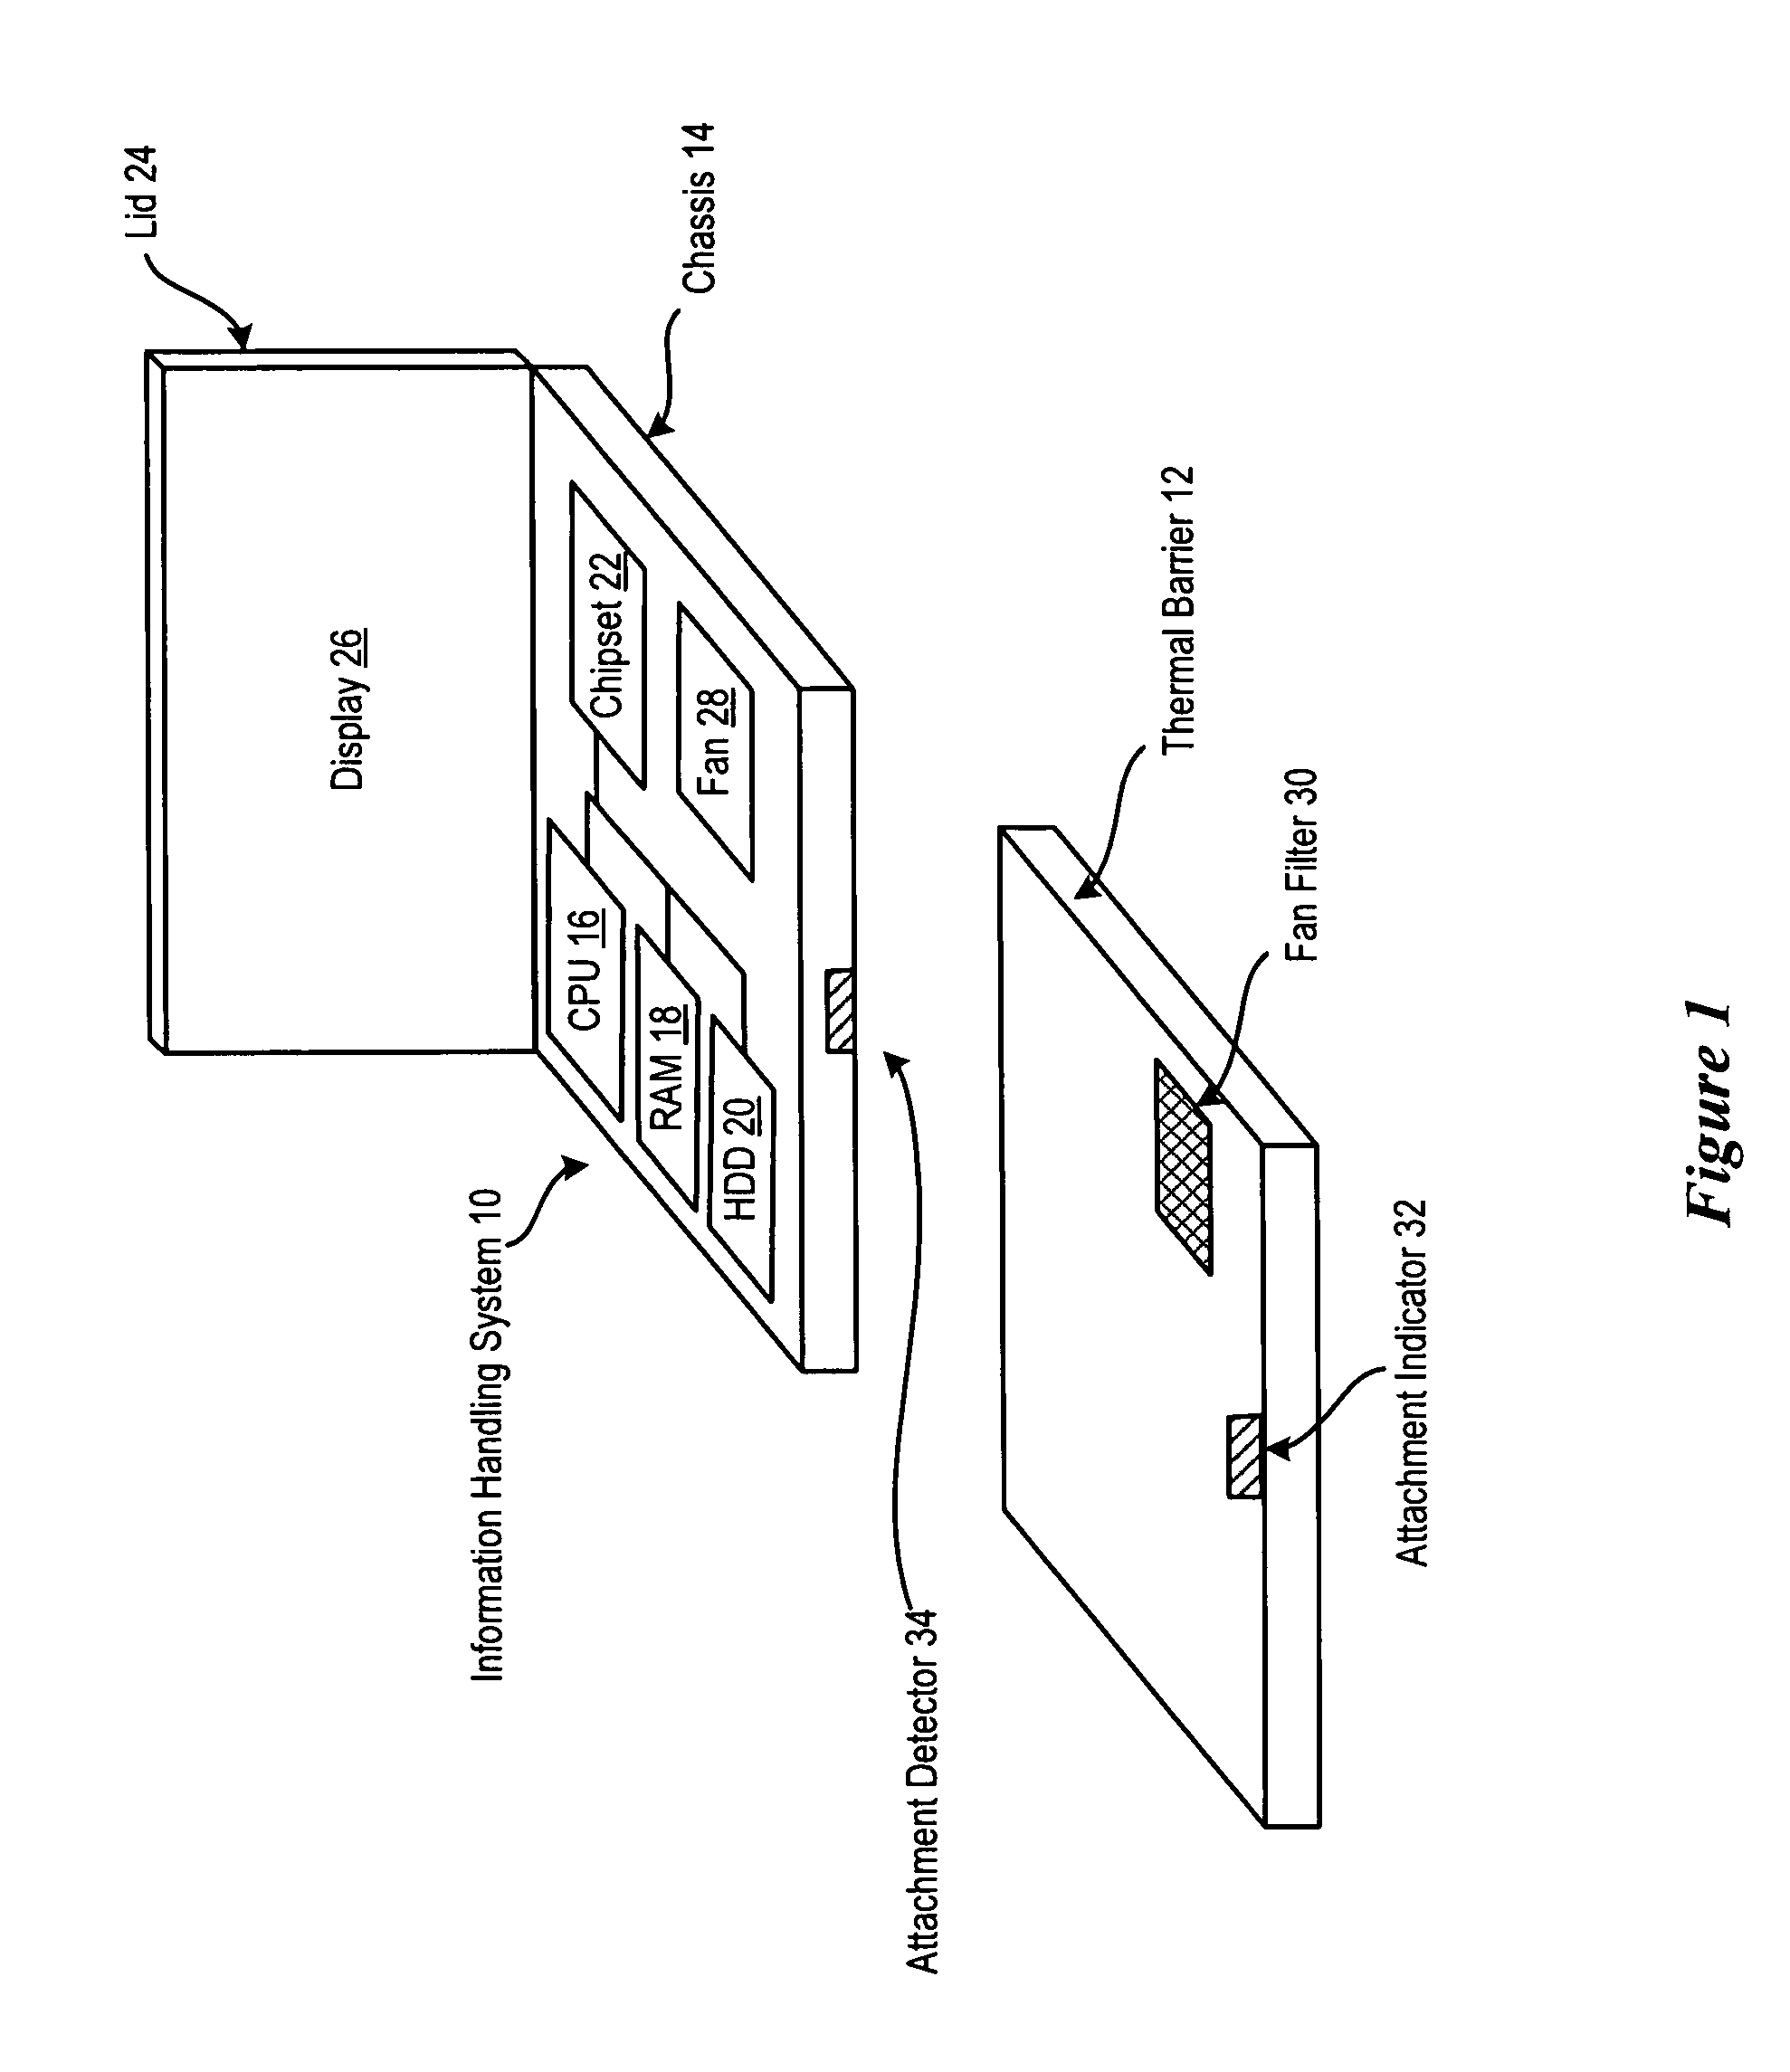 System and Method for Portable Information Handling System Thermal Shield